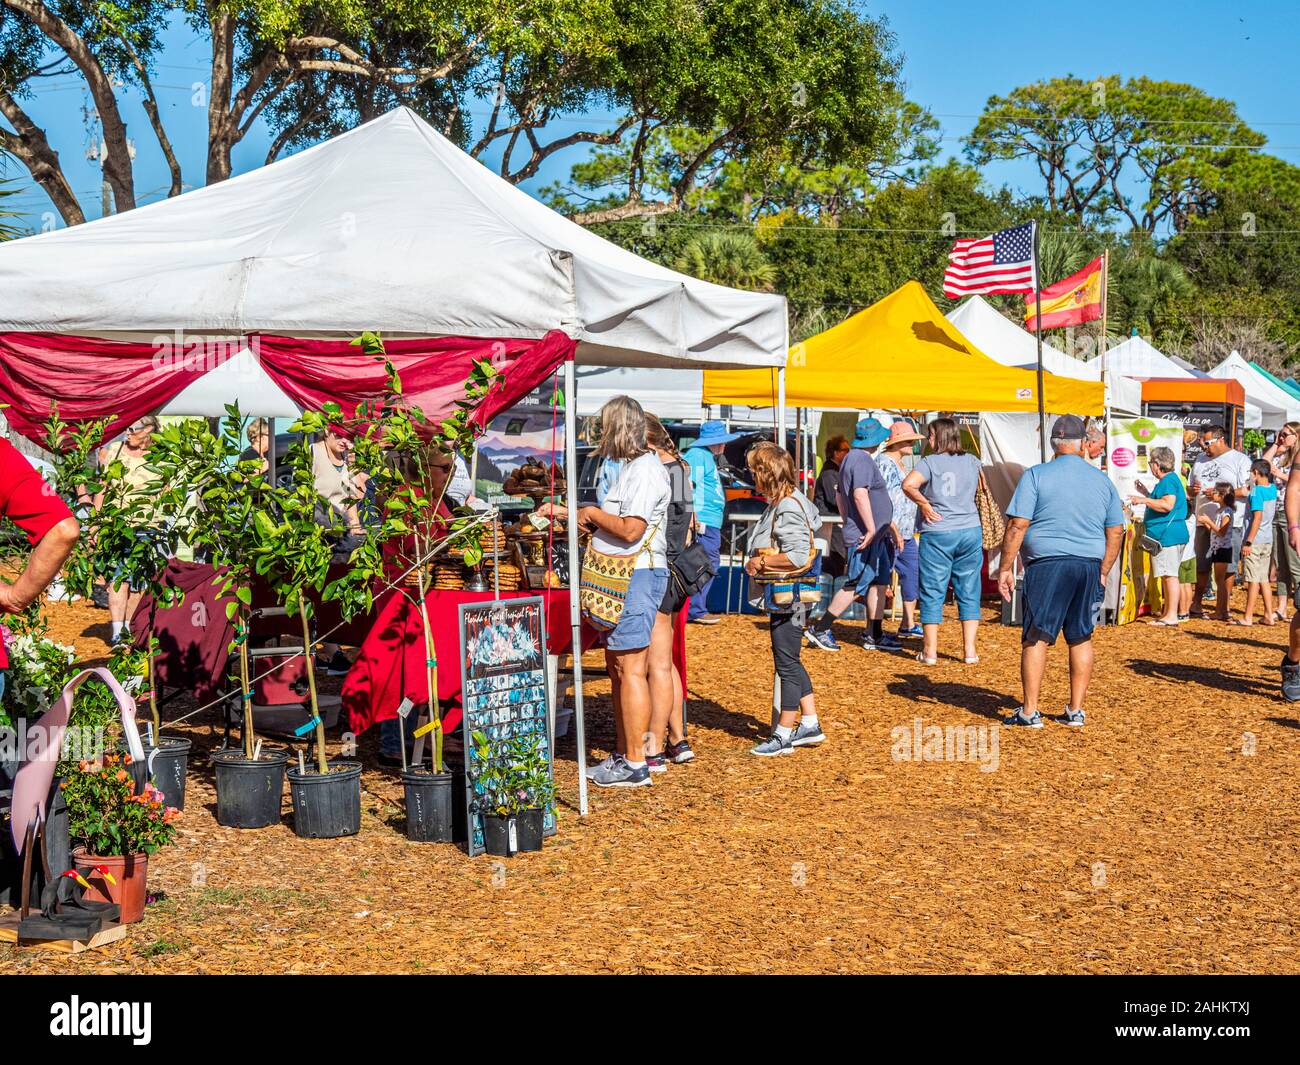 The Englewood Farmers Market an open air market in Englewood Florida Stock Photo